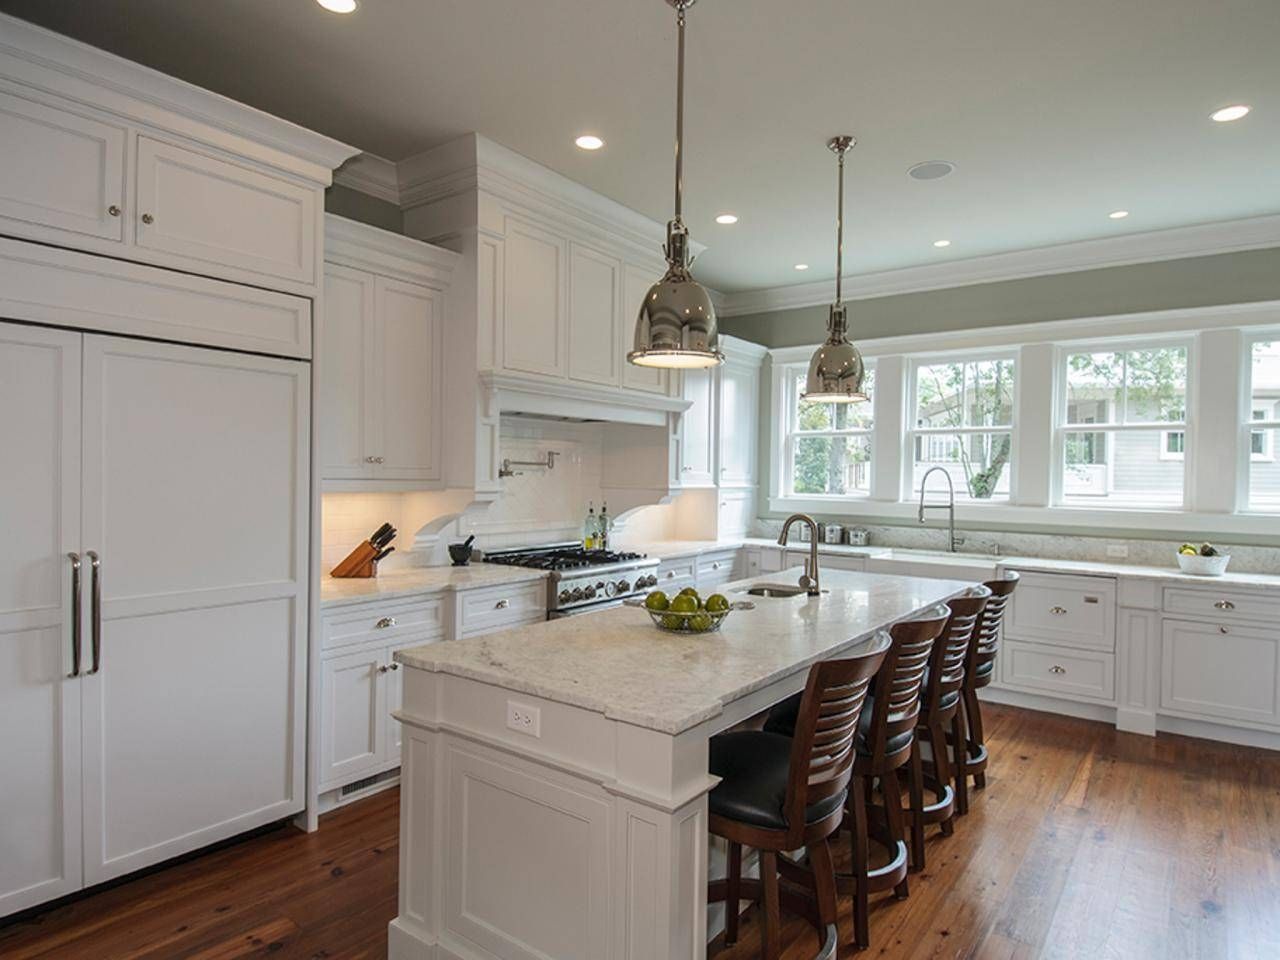 Silver Kitchen Pendant Lighting Image | The Latest Information Within Silver Kitchen Pendant Lighting (View 2 of 15)